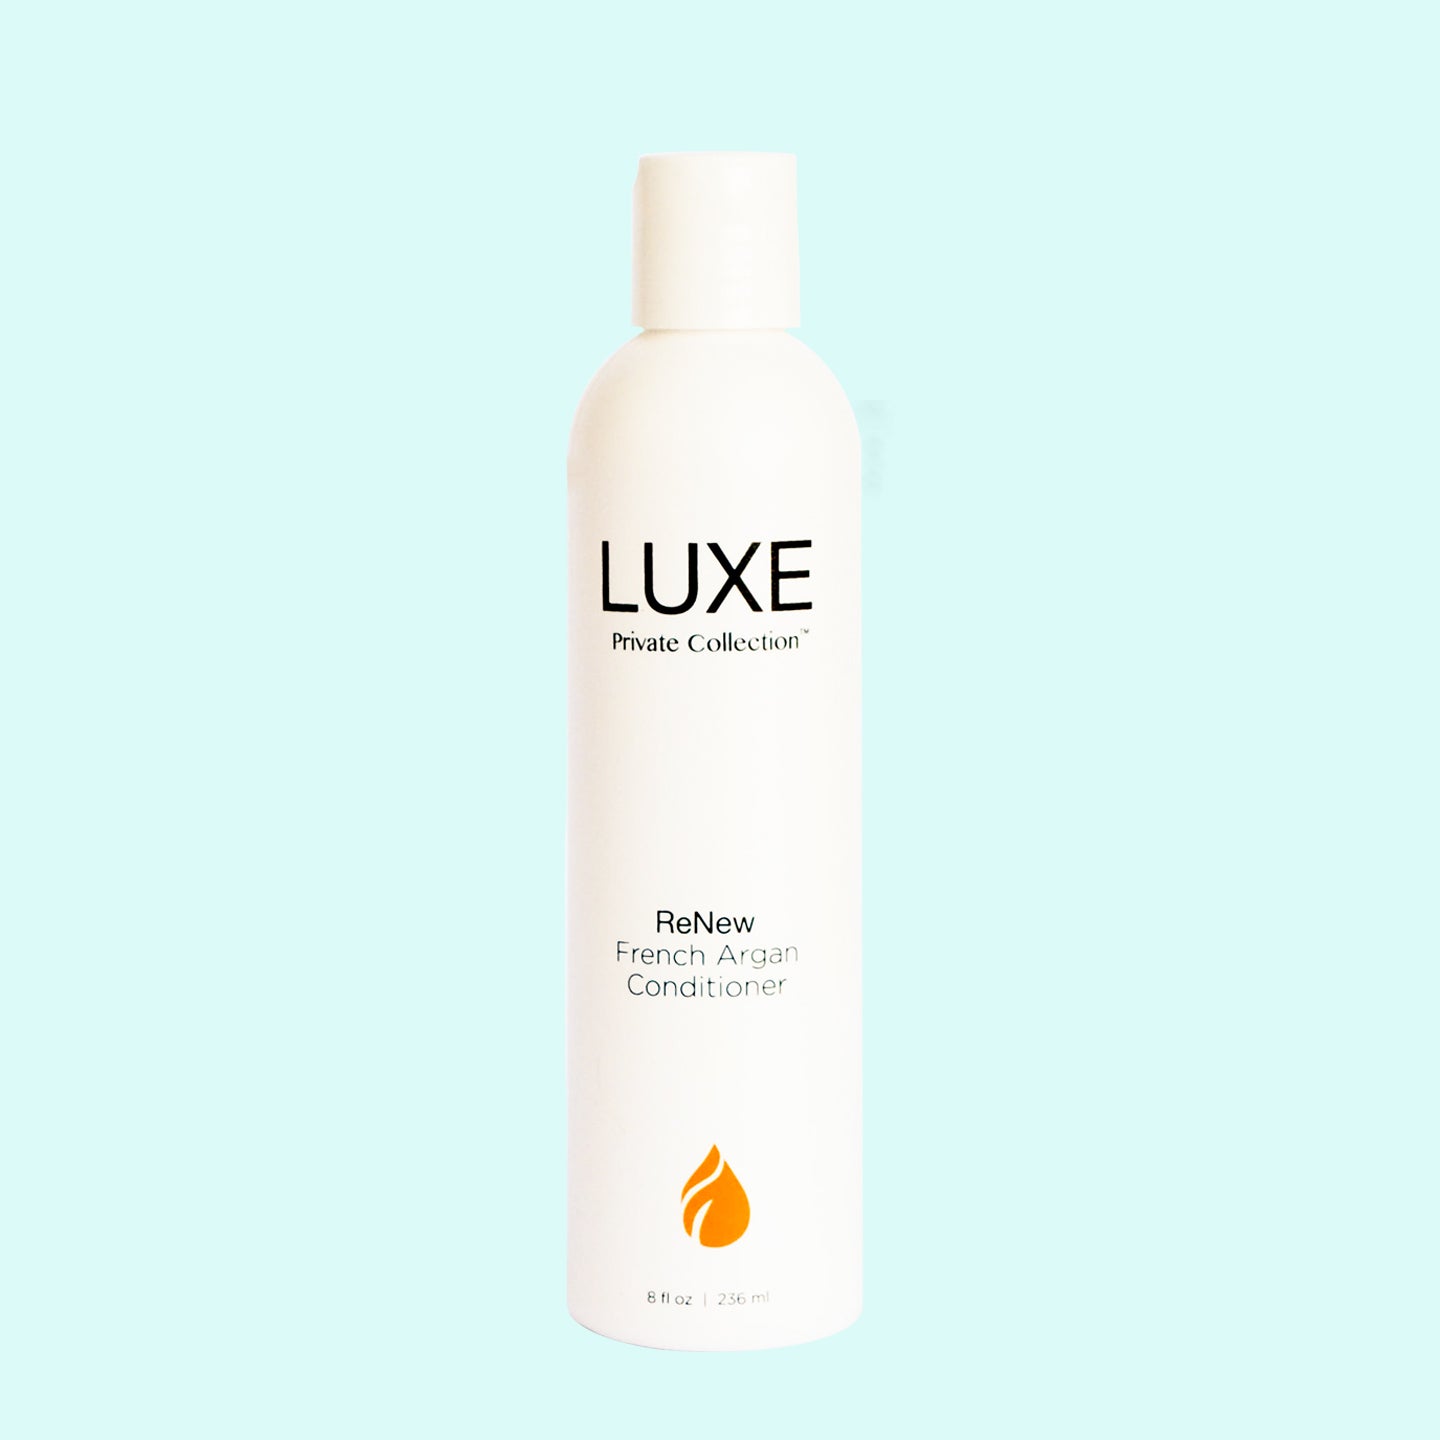 LUXE ReNew French Argan Conditioner